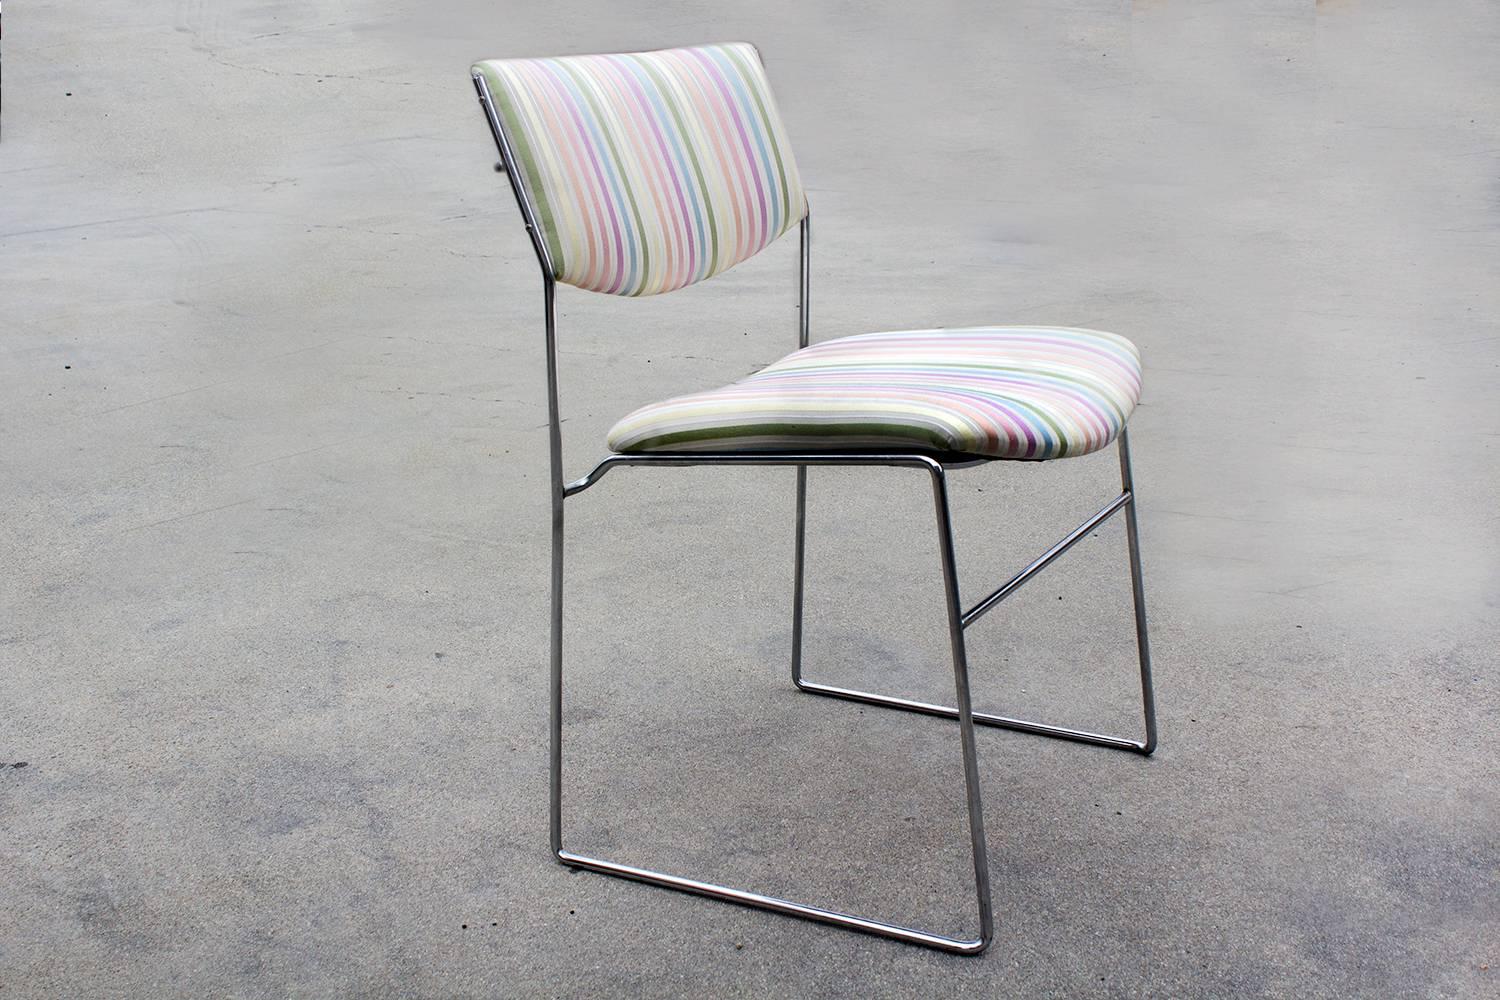 1970s Minimalist Italian side chair with original chrome frame. Newly reupholstered seat in rainbow silk. 

Dimensions: 17.5